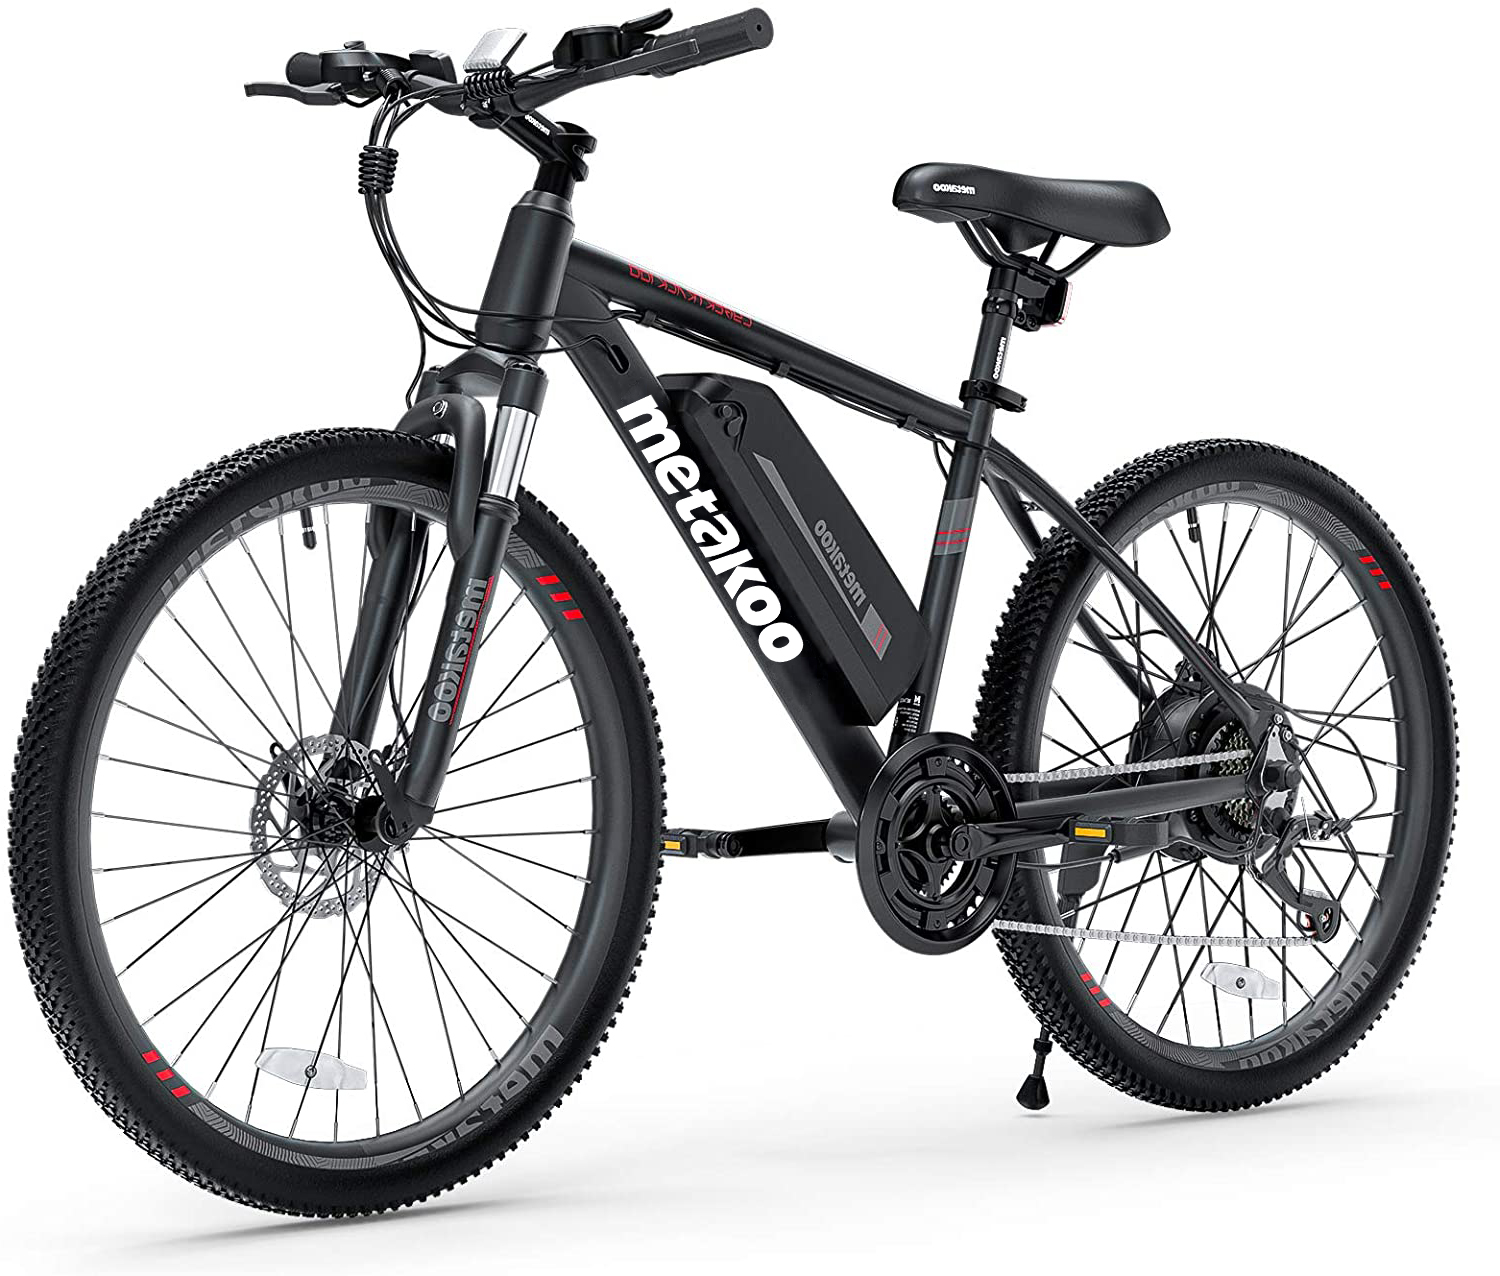 Metakoo 26 In. Mountain Electric Bicycle, 350 W Motor, 3 Hours Fast Charge, 36V Removable Battery, 20Mph with 21 Speed Gears, Black - image 1 of 7